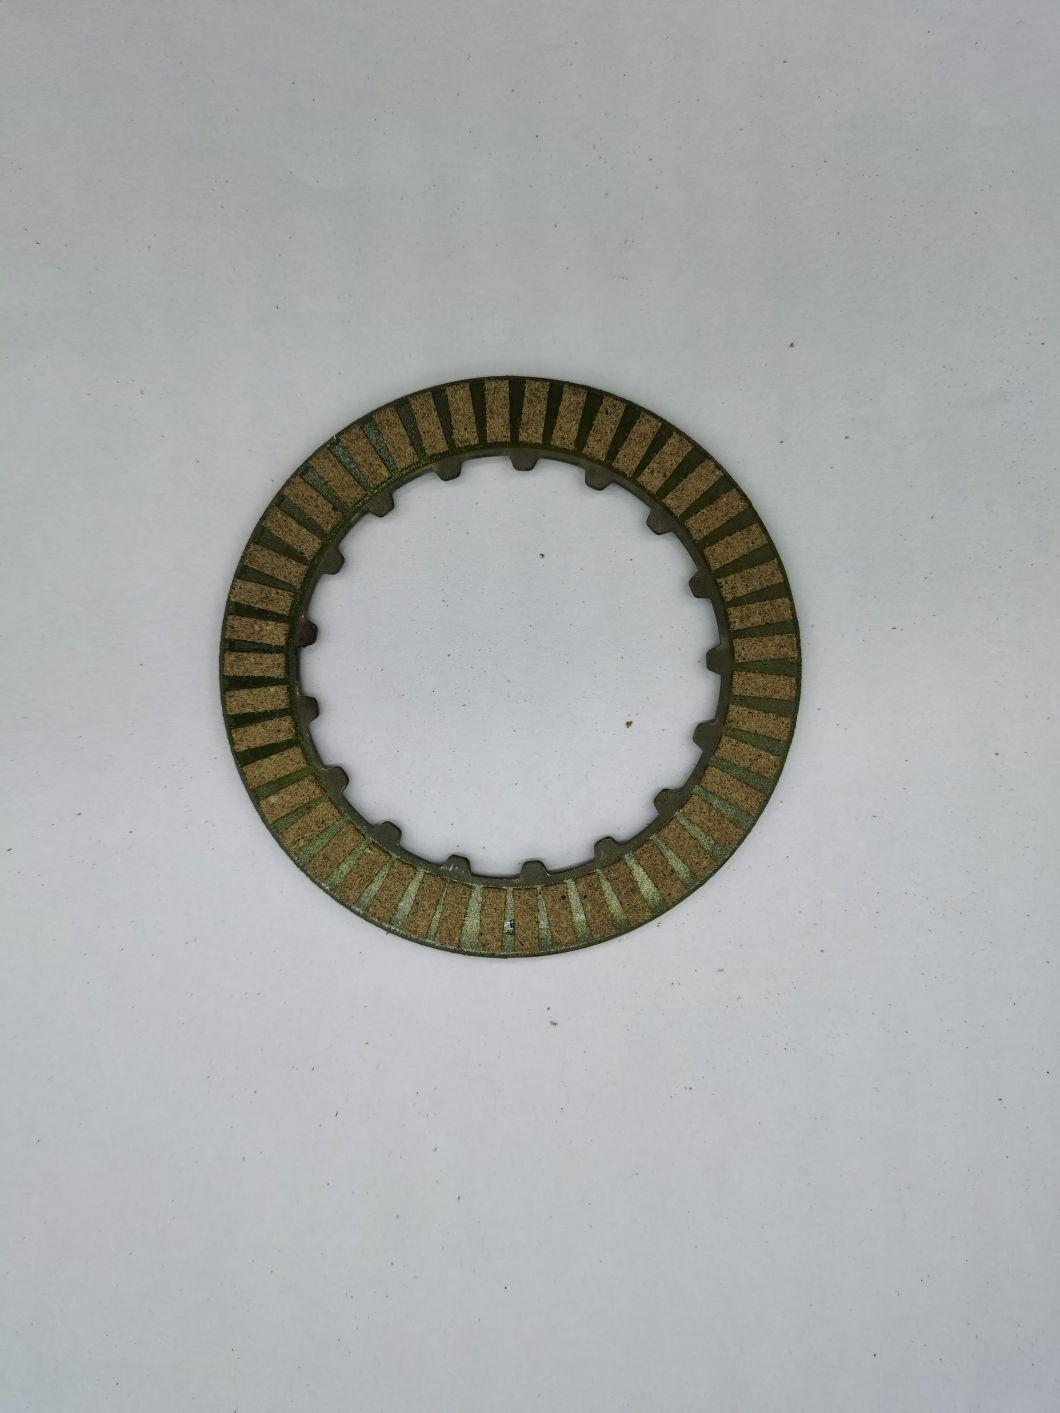 New Product and Good Quality Motorcycle Parts of CD70 Friction Plate for Paper Base